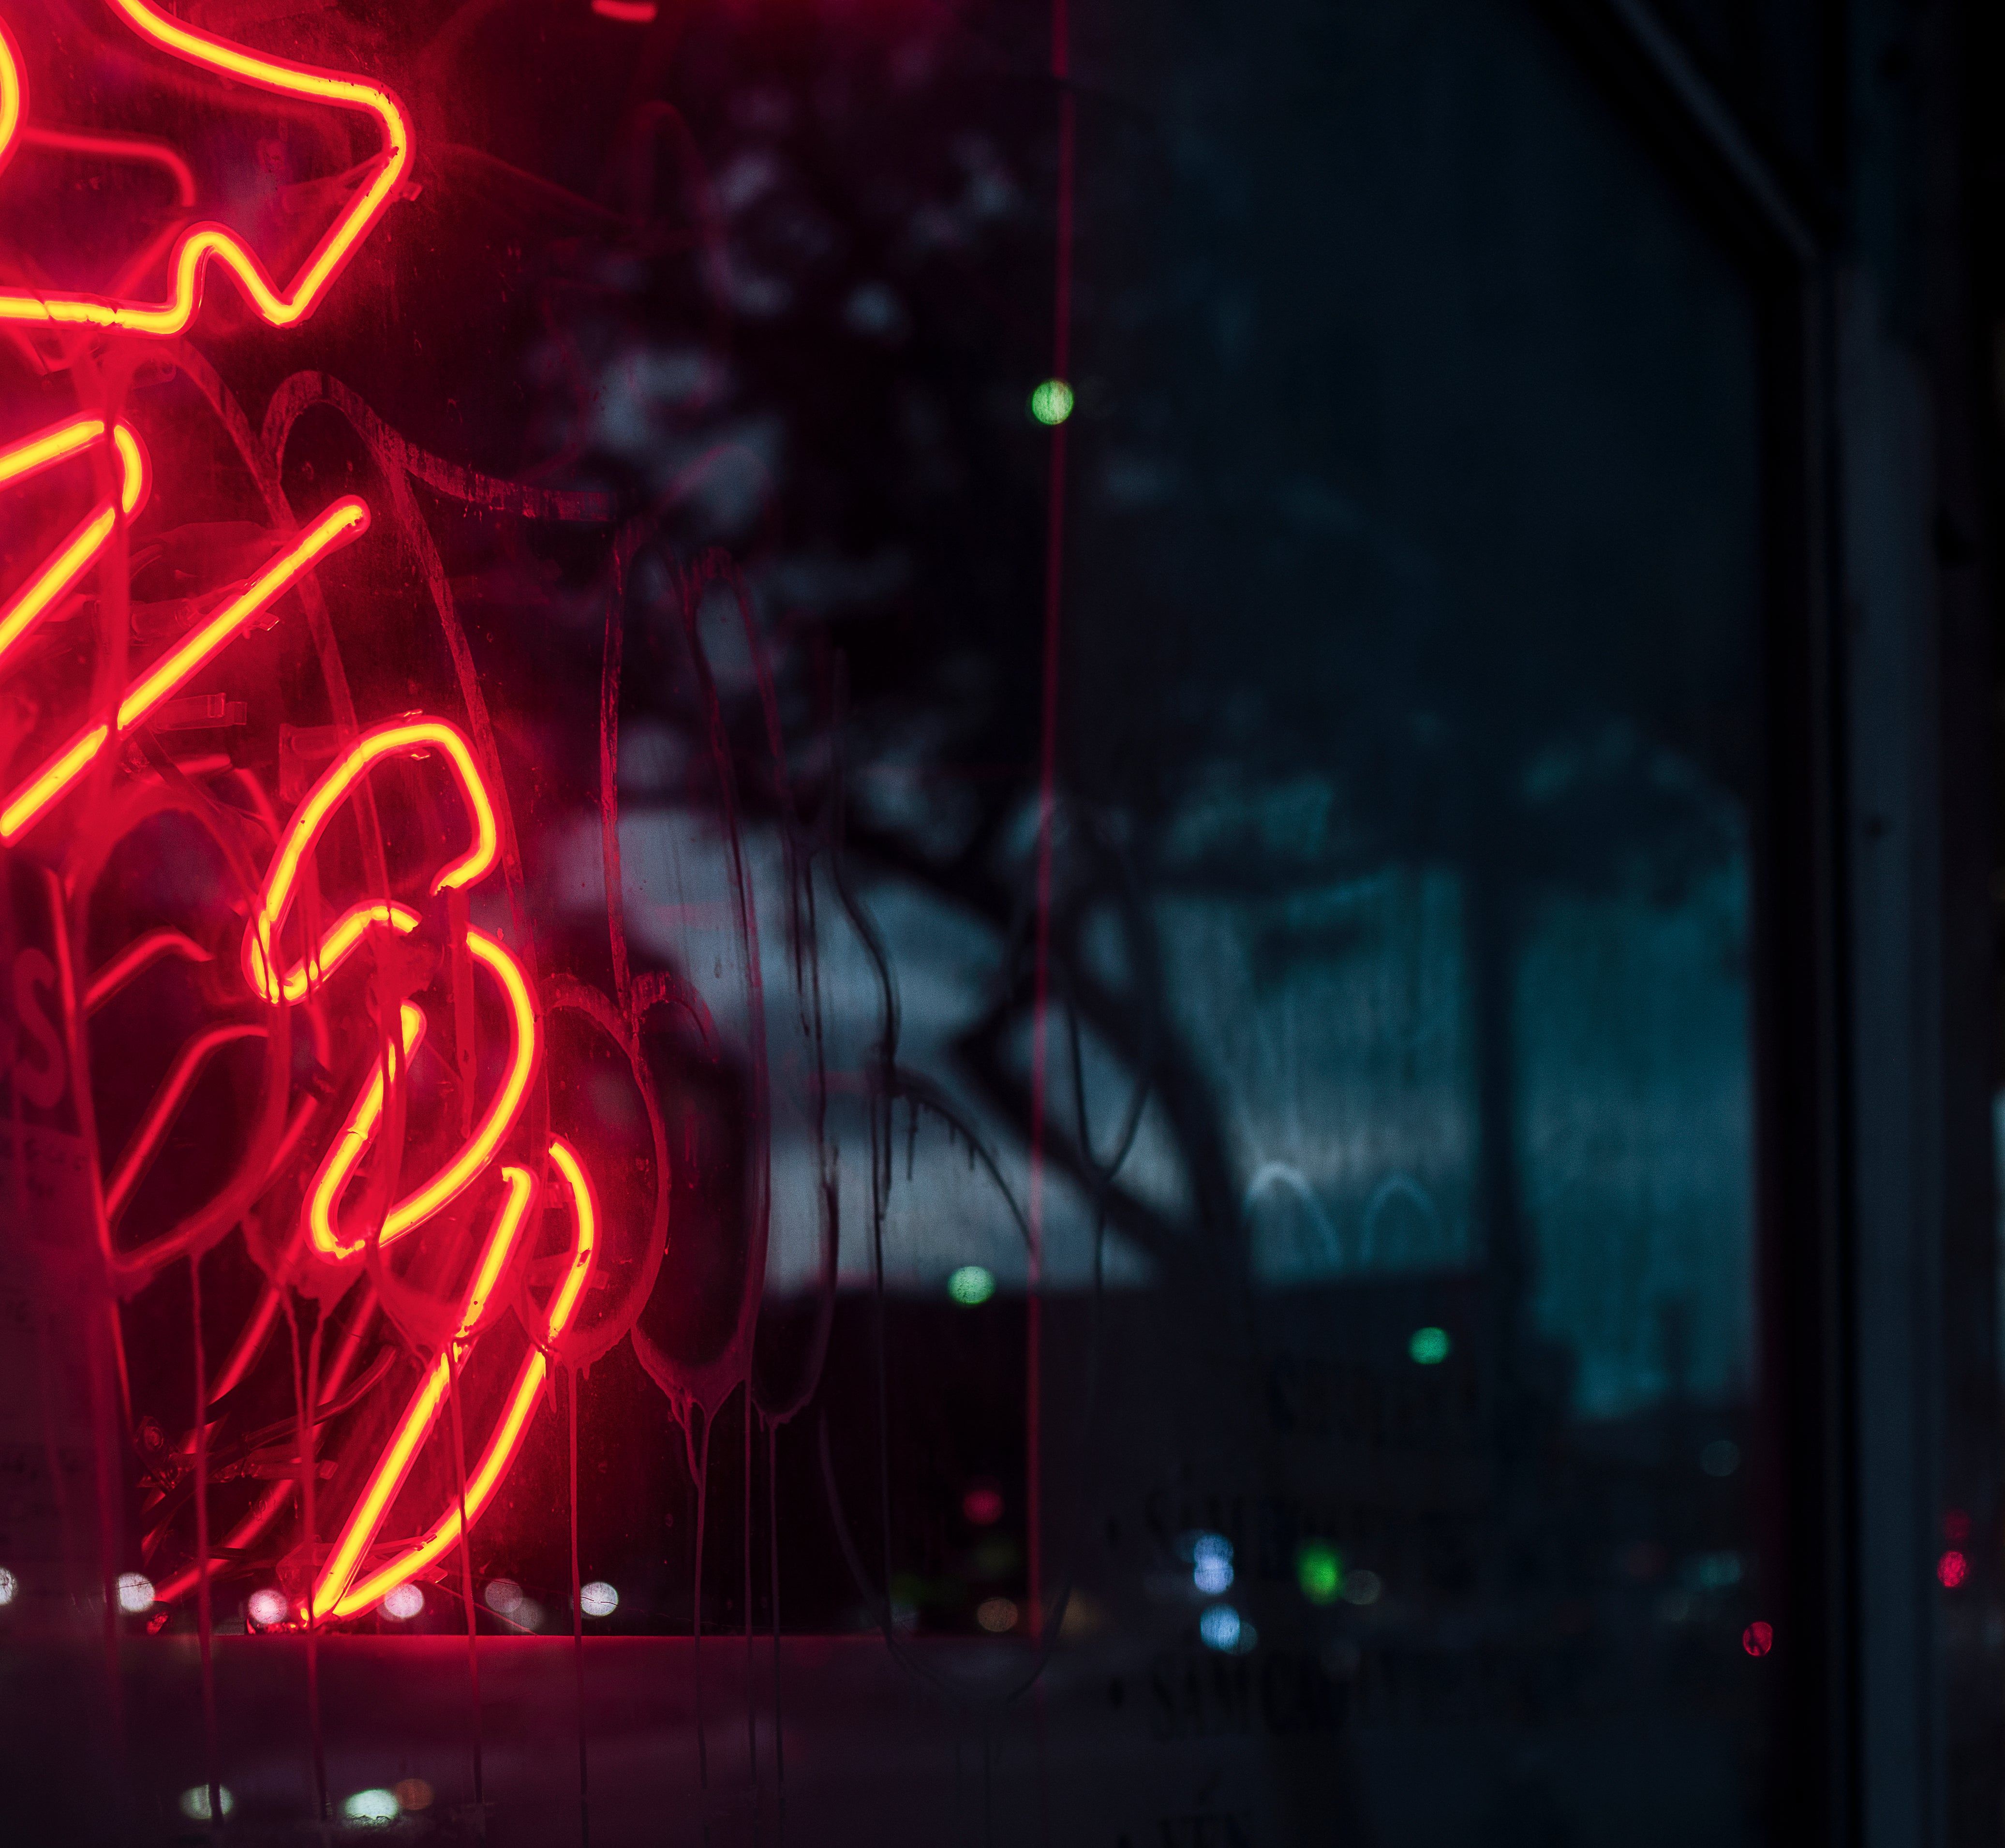 Browse Free HD Image of Neon Light Reflection On Window